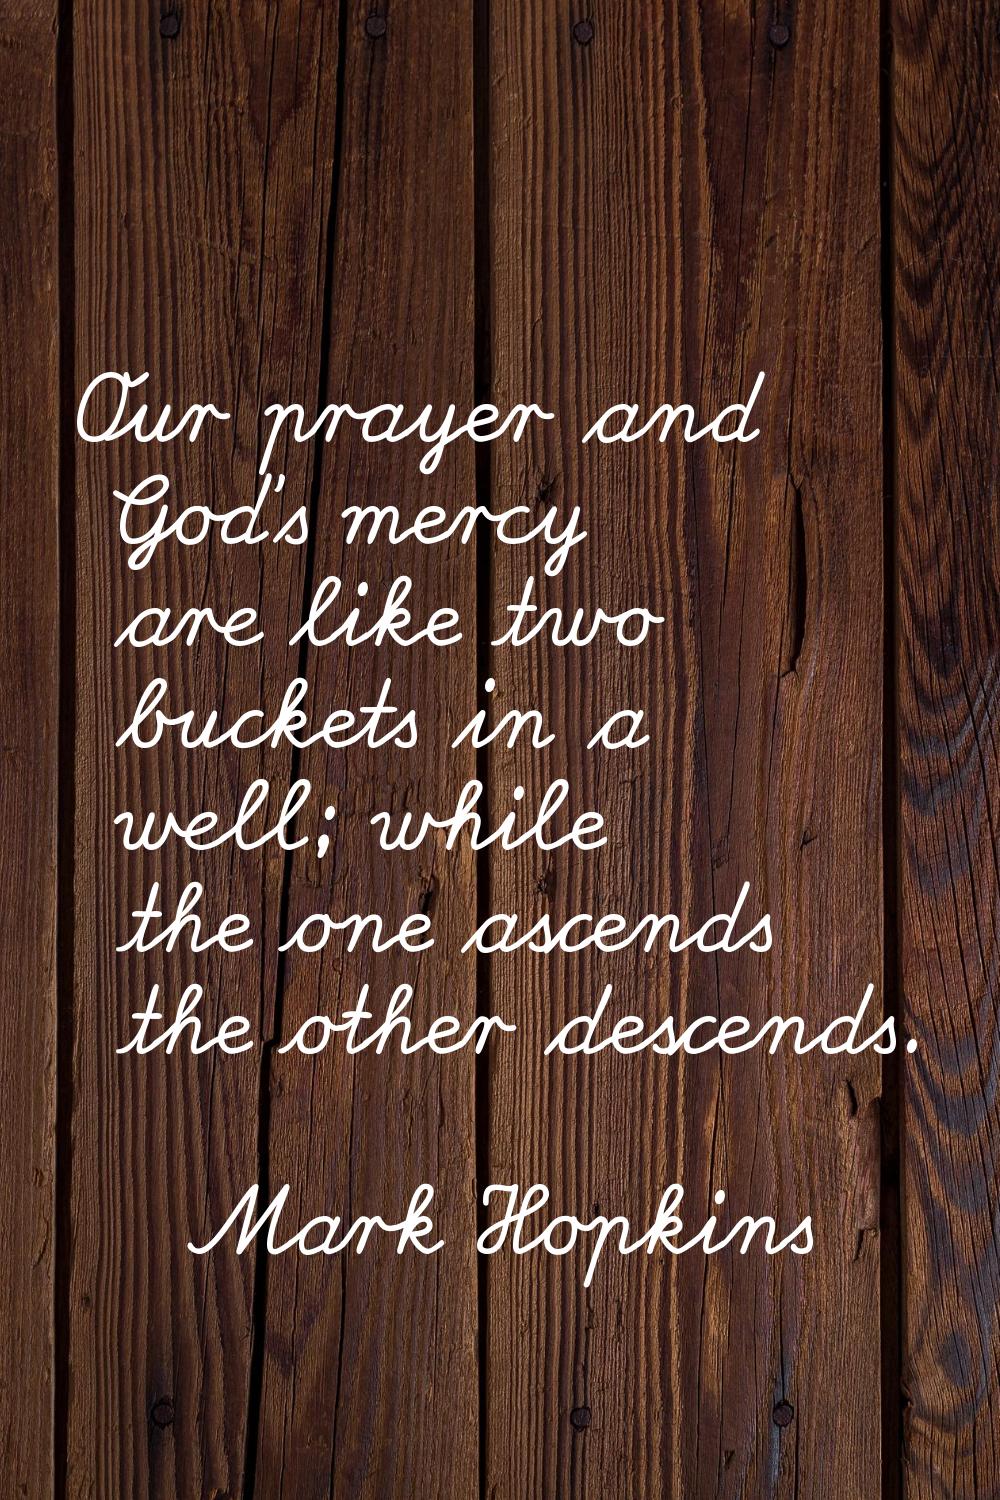 Our prayer and God's mercy are like two buckets in a well; while the one ascends the other descends